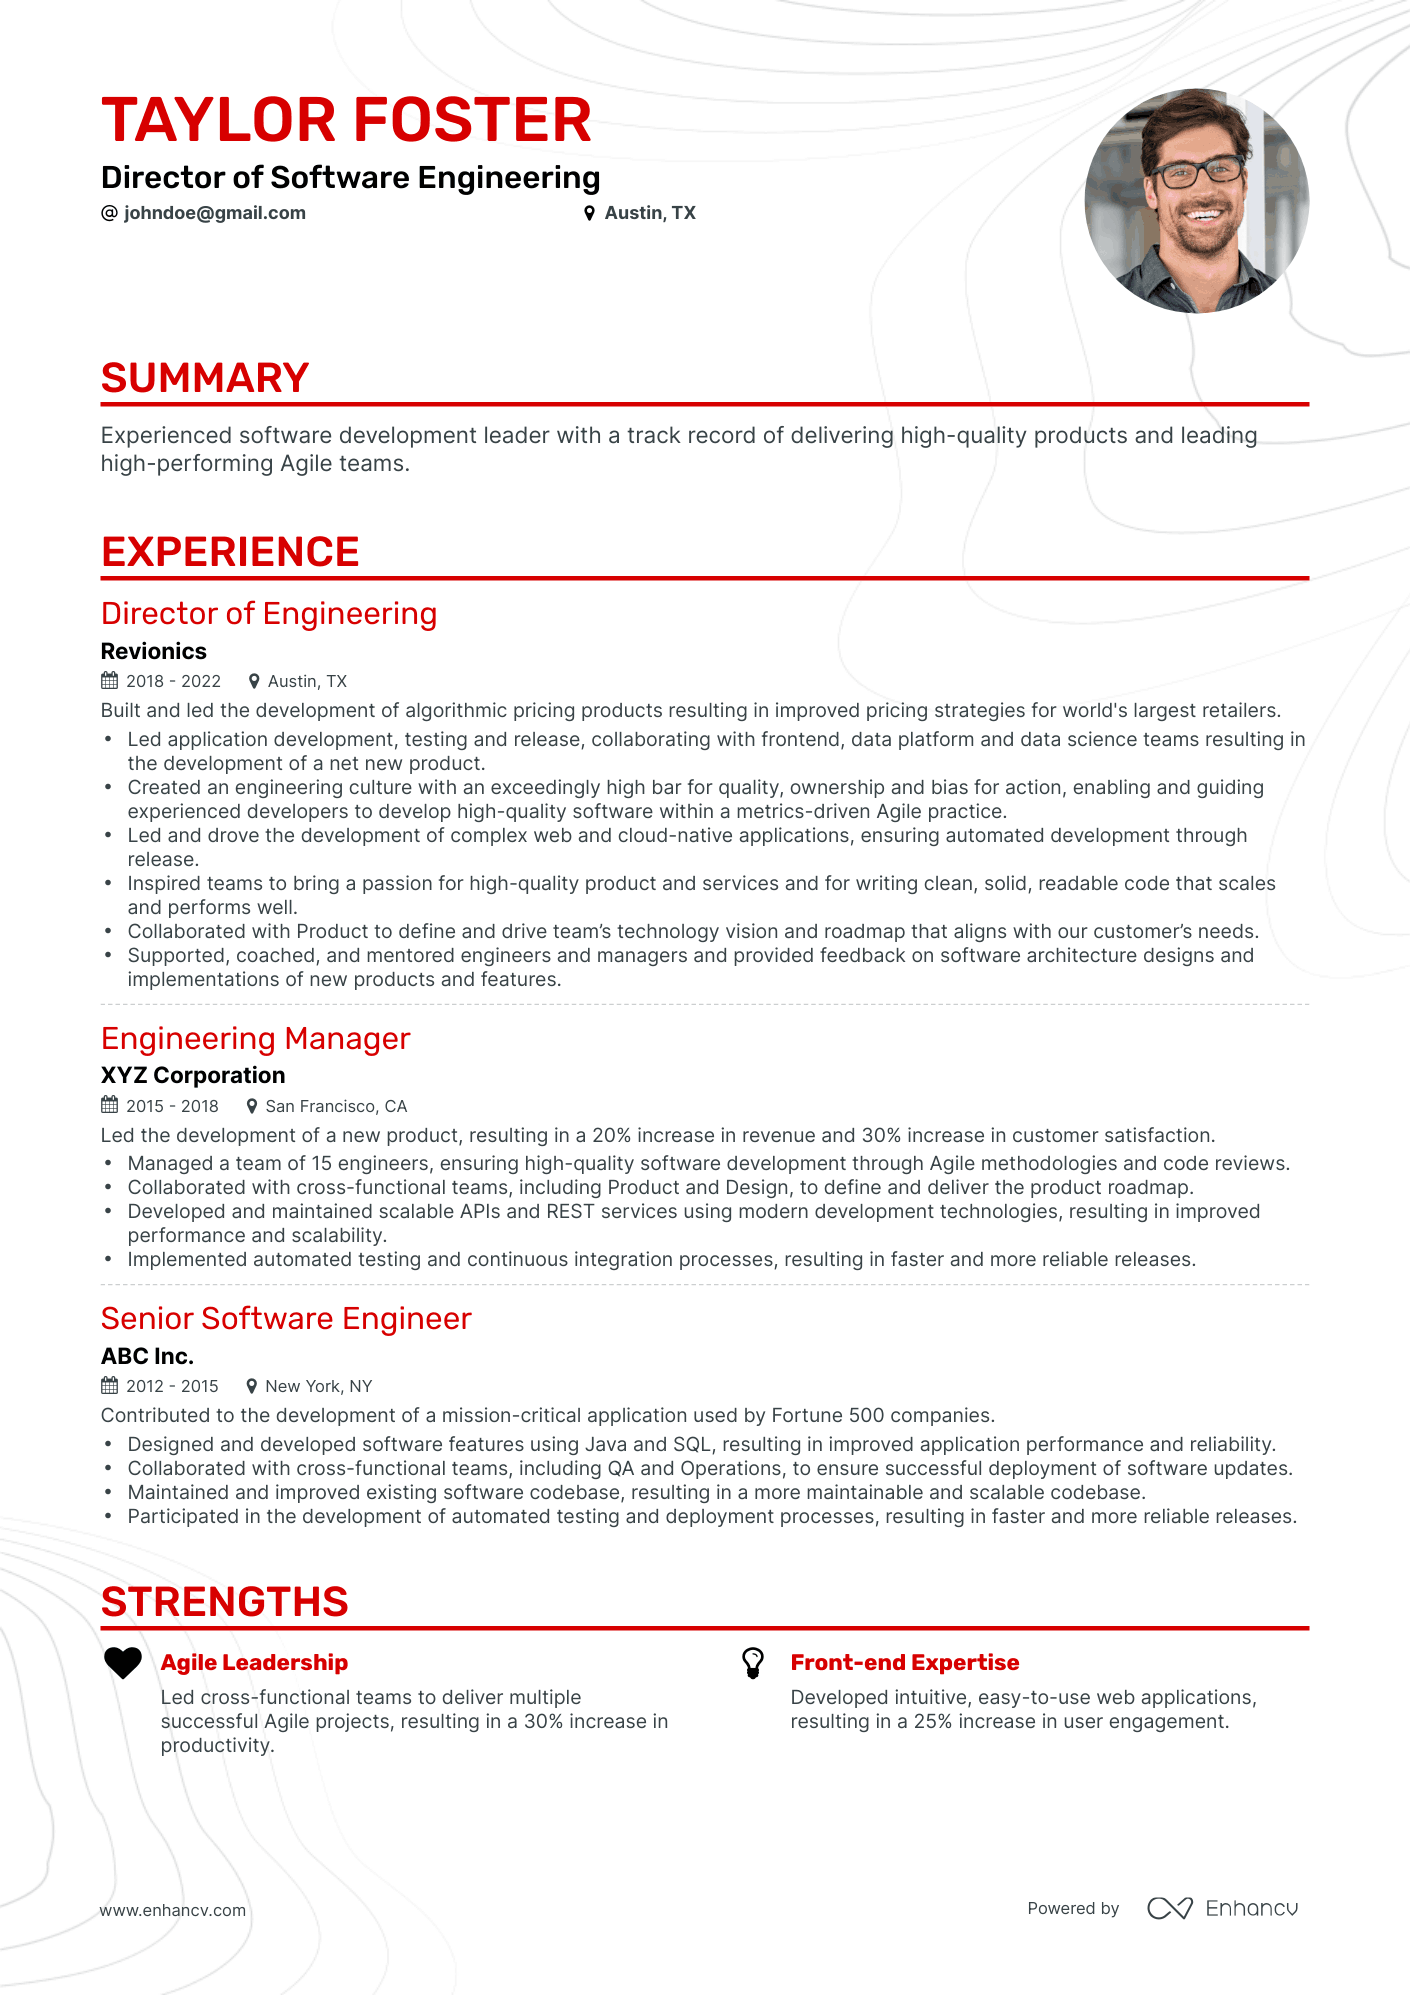 Classic Director of Software Engineering Resume Template